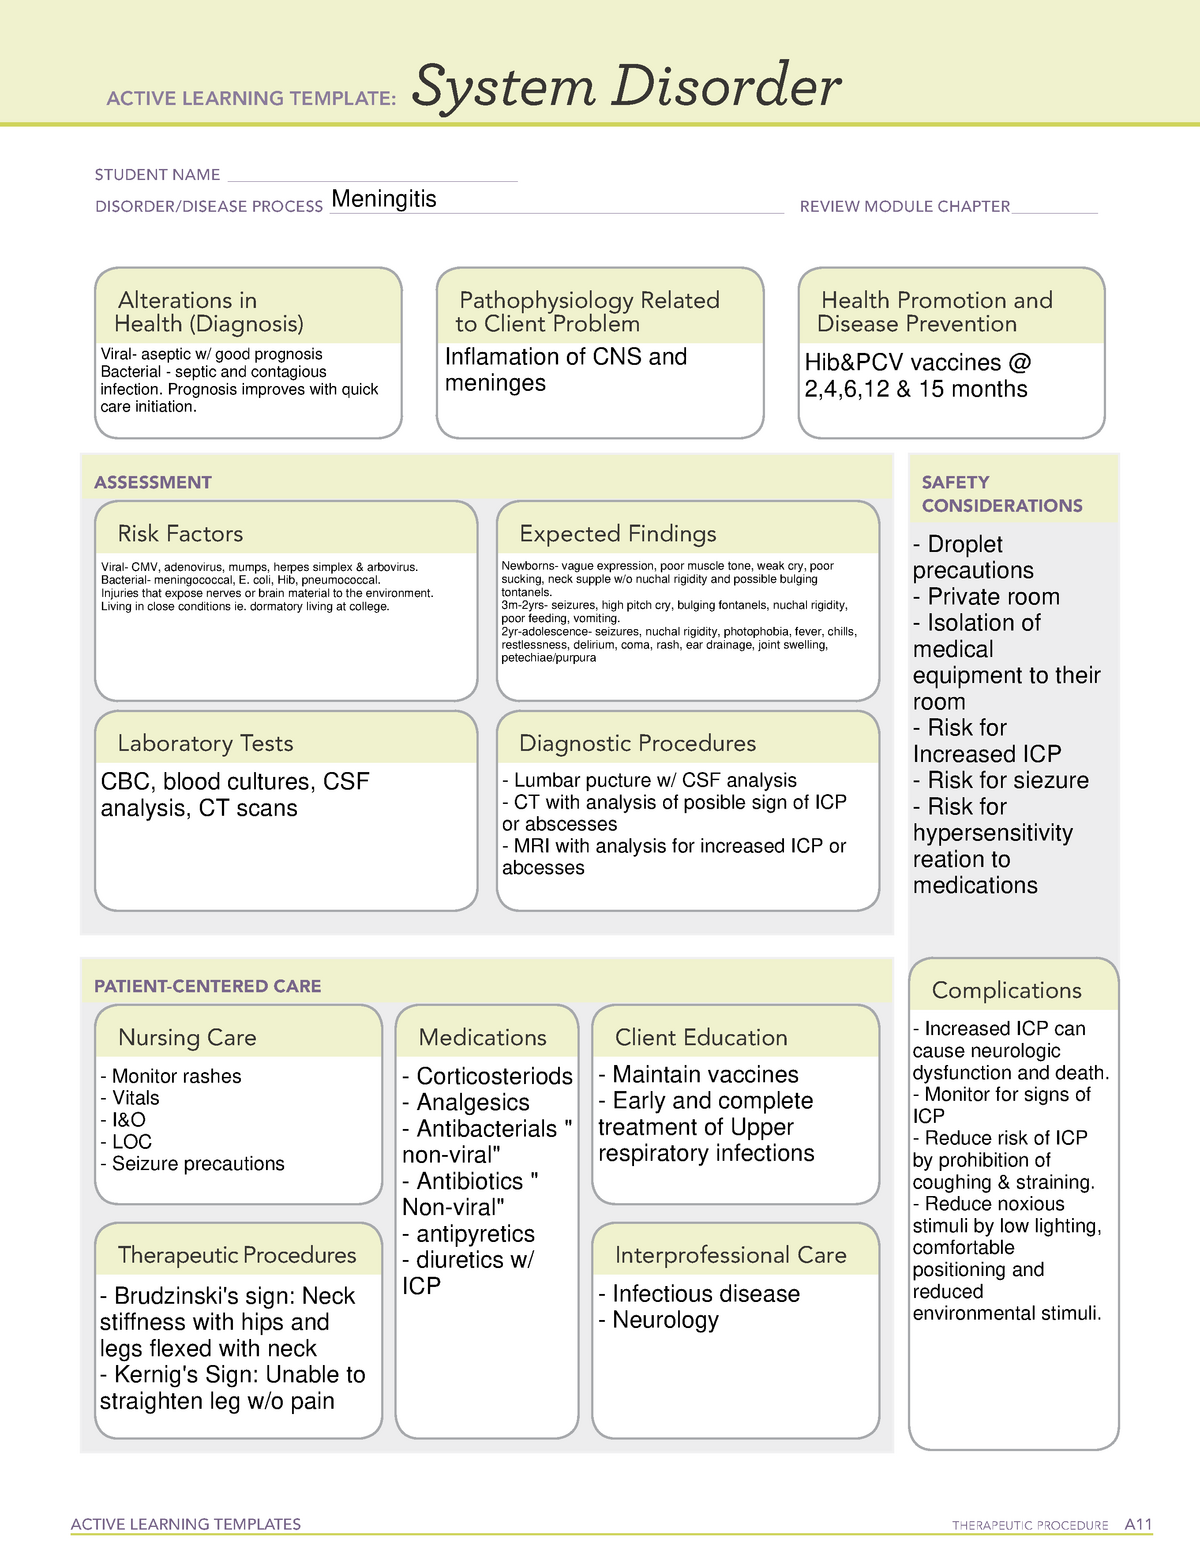 Meningitis System Disorder Template - ACTIVE LEARNING TEMPLATES ...